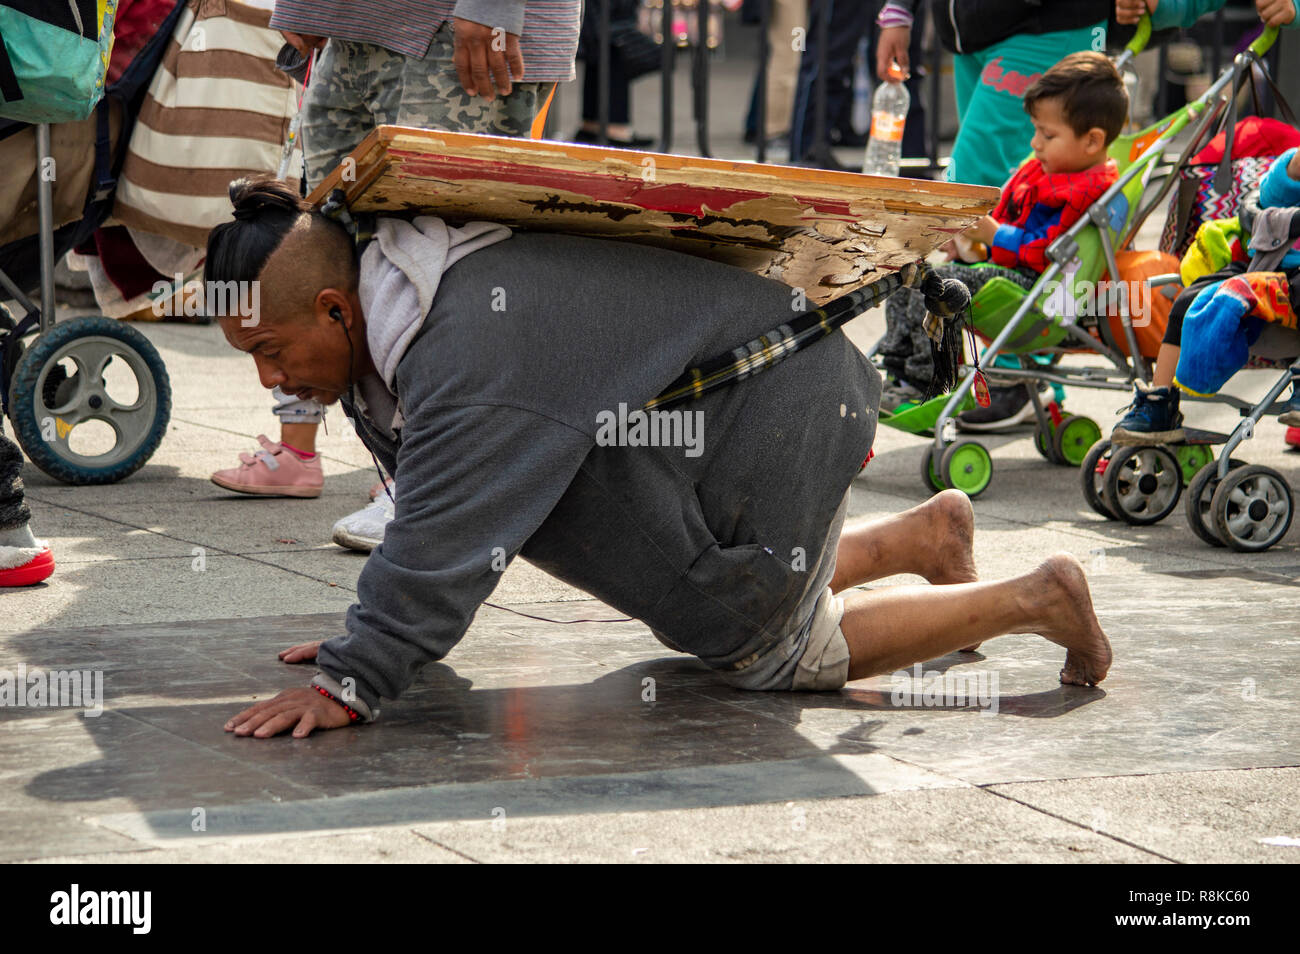 A pilgrim crawling to the Basilica of Our Lady of Guadalupe in Mexico City, Mexico Stock Photo